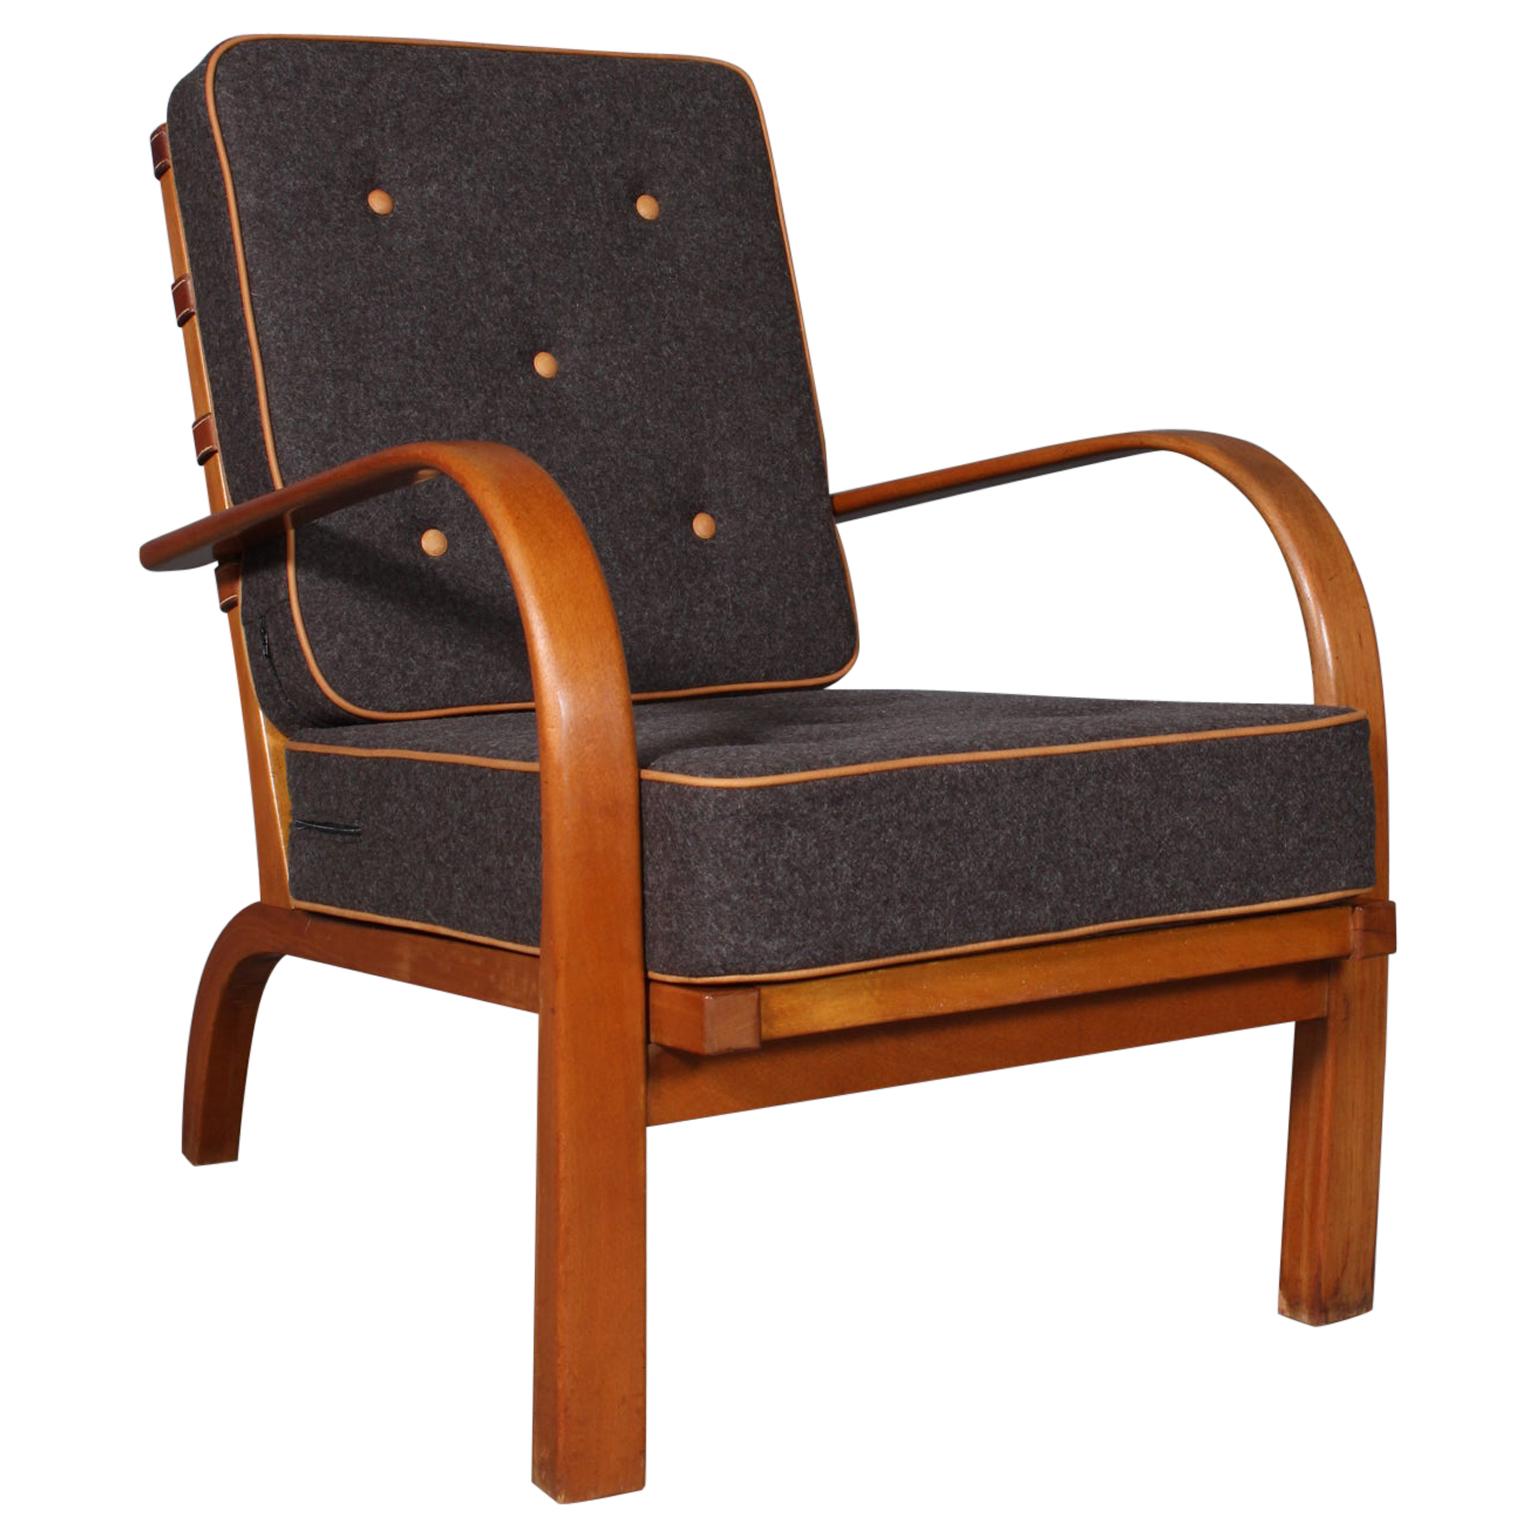 Fritz Hansen Rare Lounge Chair from the 1930s